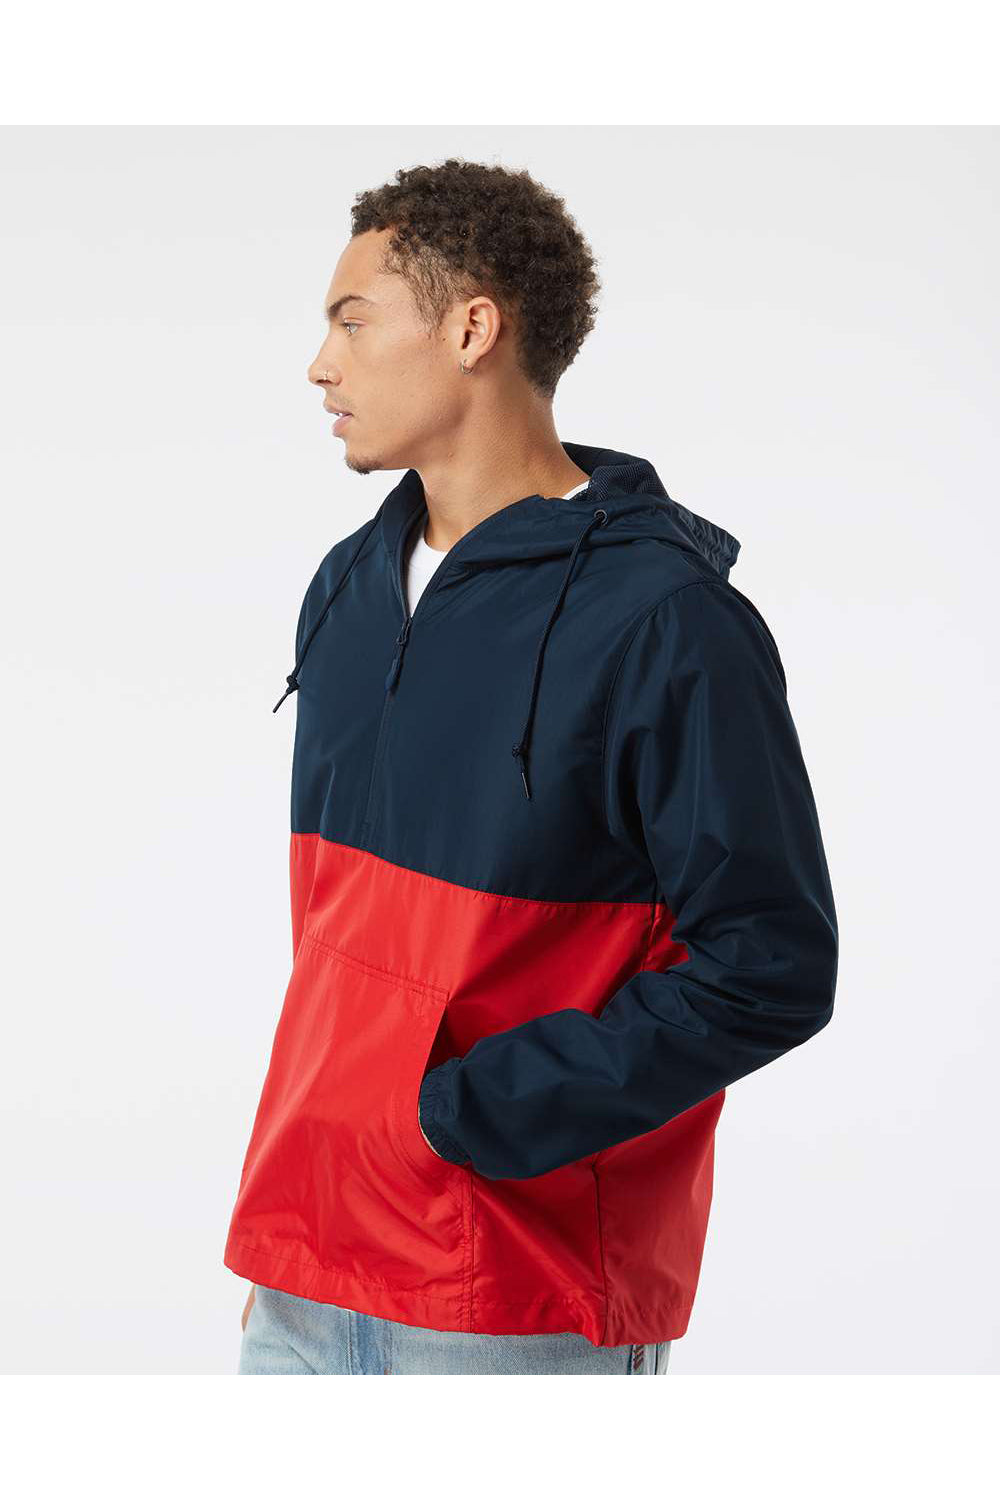 Independent Trading Co. EXP54LWP Mens 1/4 Zip Windbreaker Hooded Jacket Classic Navy Blue/Red Model Side